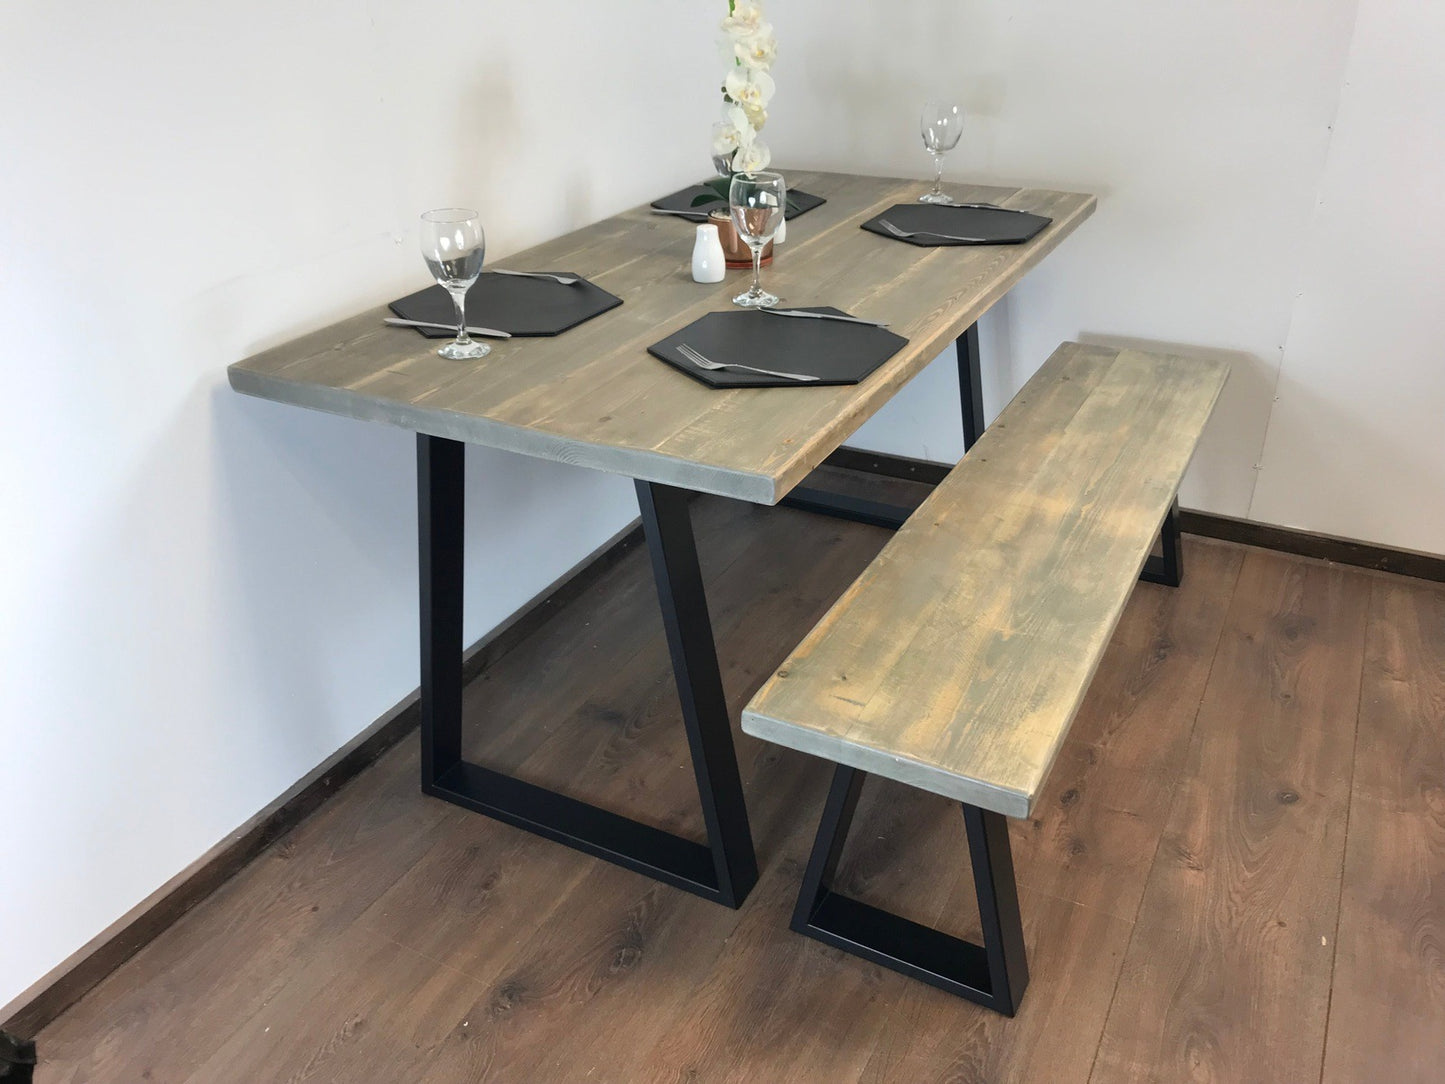 Rustic trapezium Leg Solid Wood Dining Table Set with Matching Bench Options